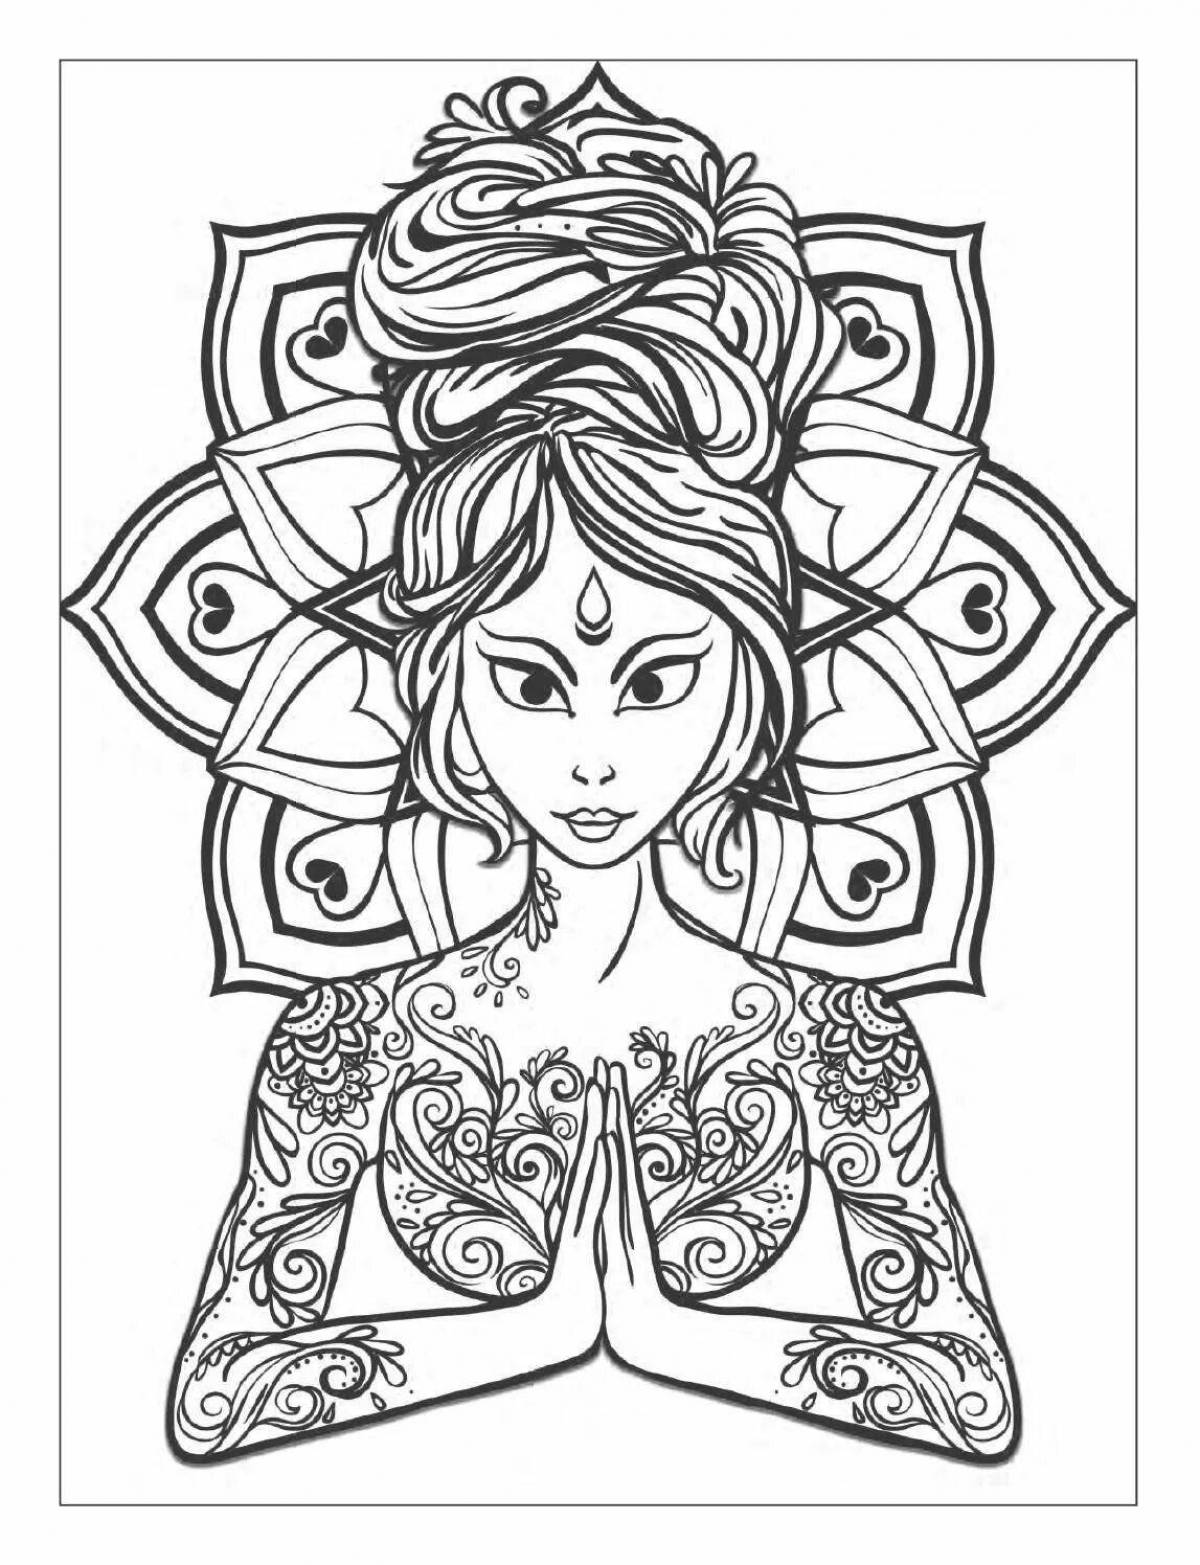 Calming yoga coloring page